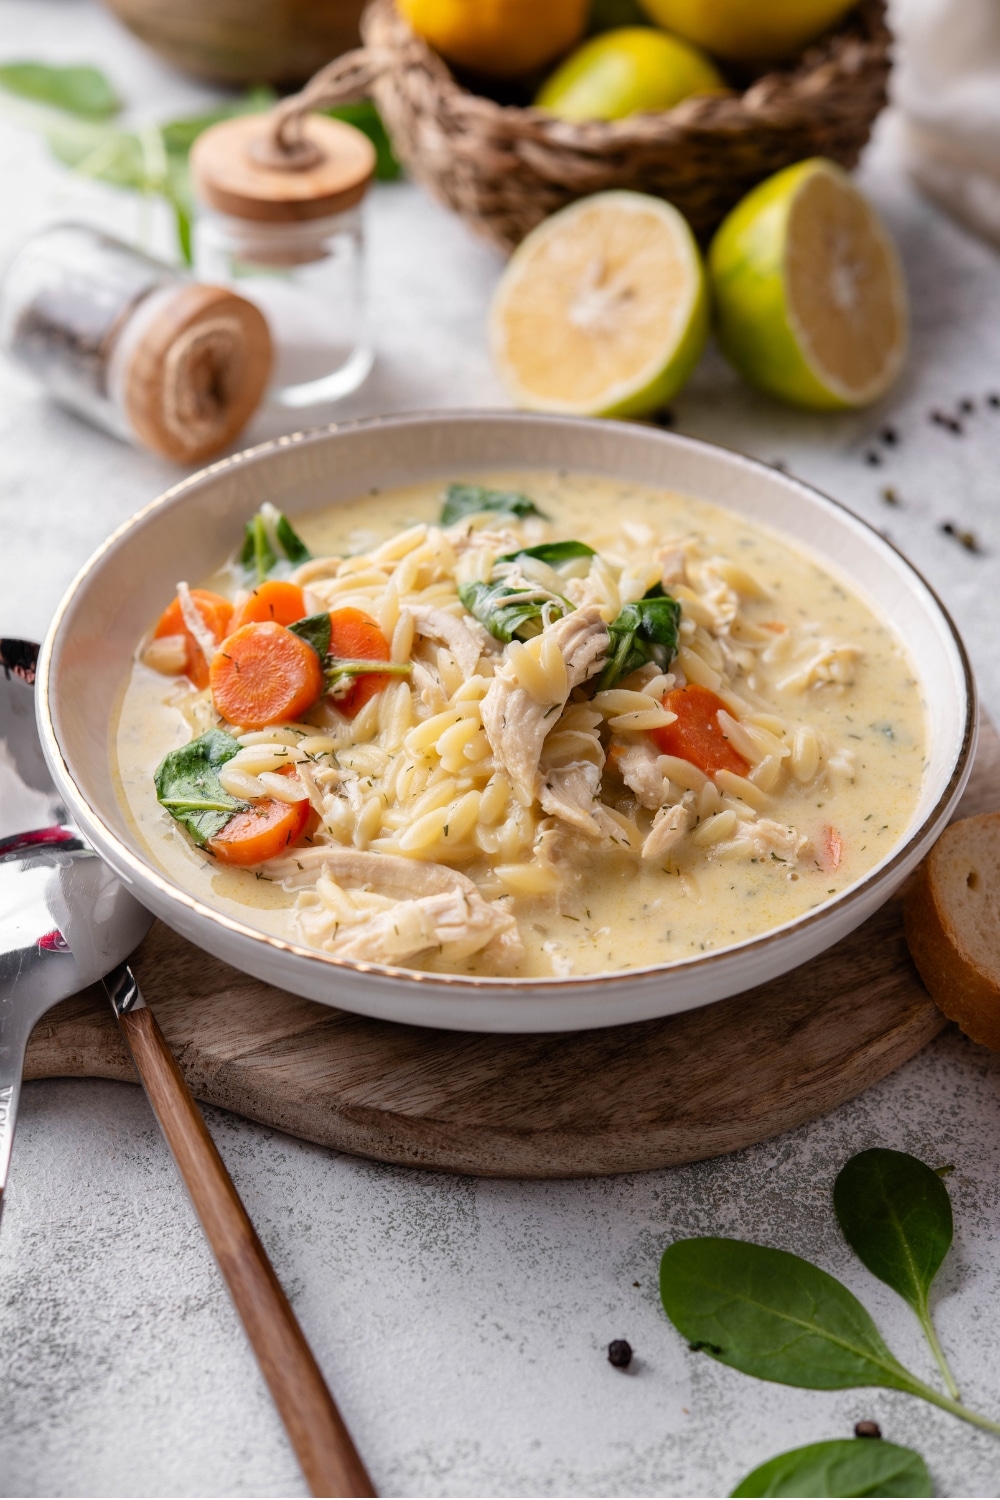 A white ceramic bowl of lemon chicken soup with orzo pasta, carrots, and spinach. The bowl sits on a wooden board with two spoons on the side.